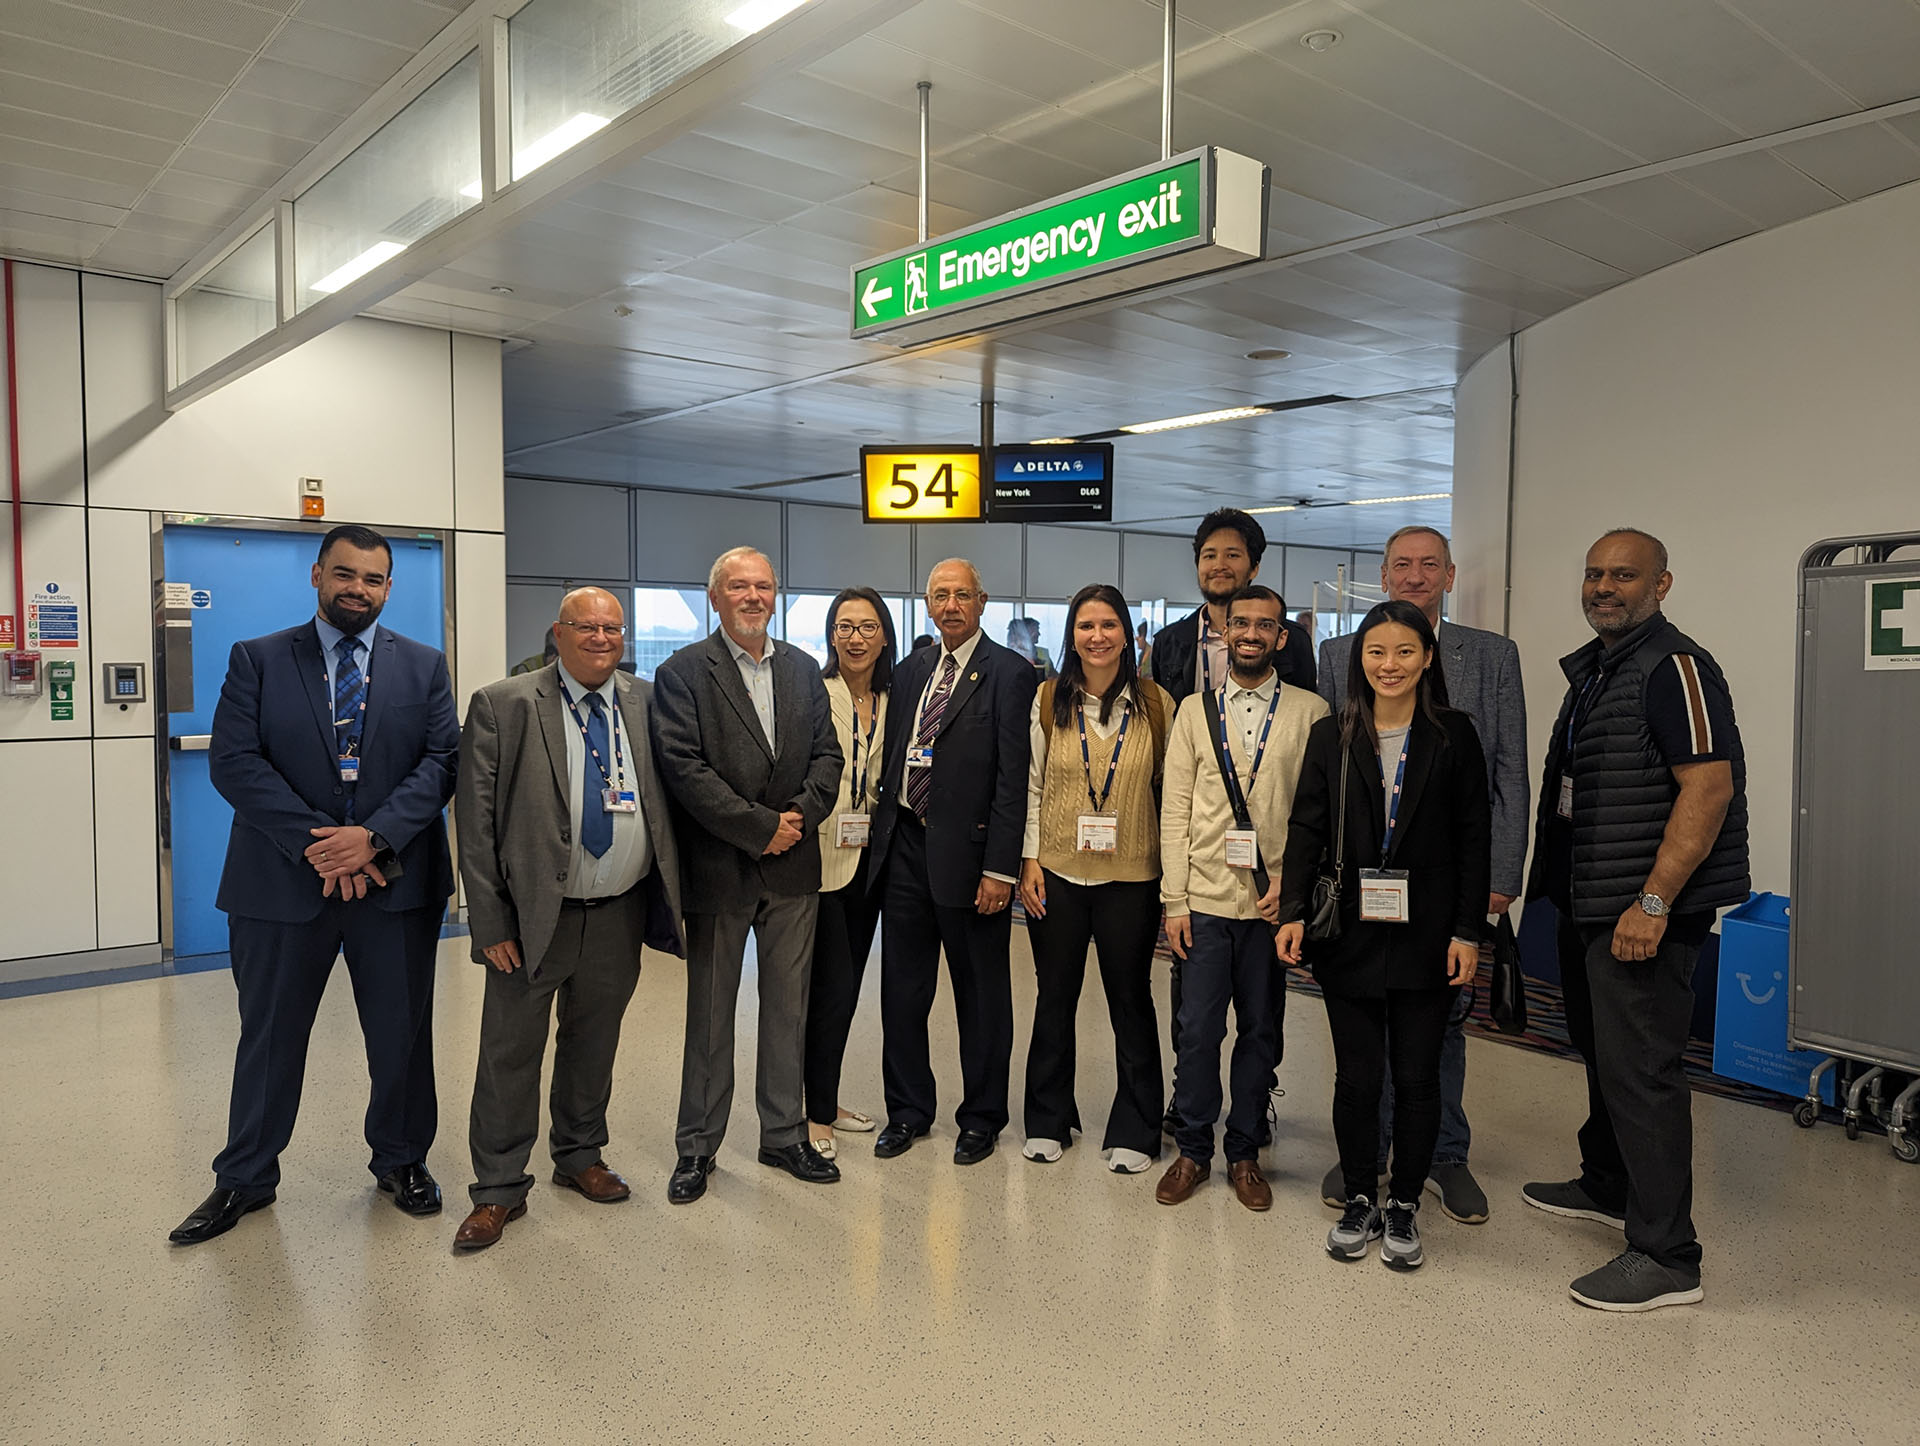 The ICTS Systems Europe team at Gatwick Airport